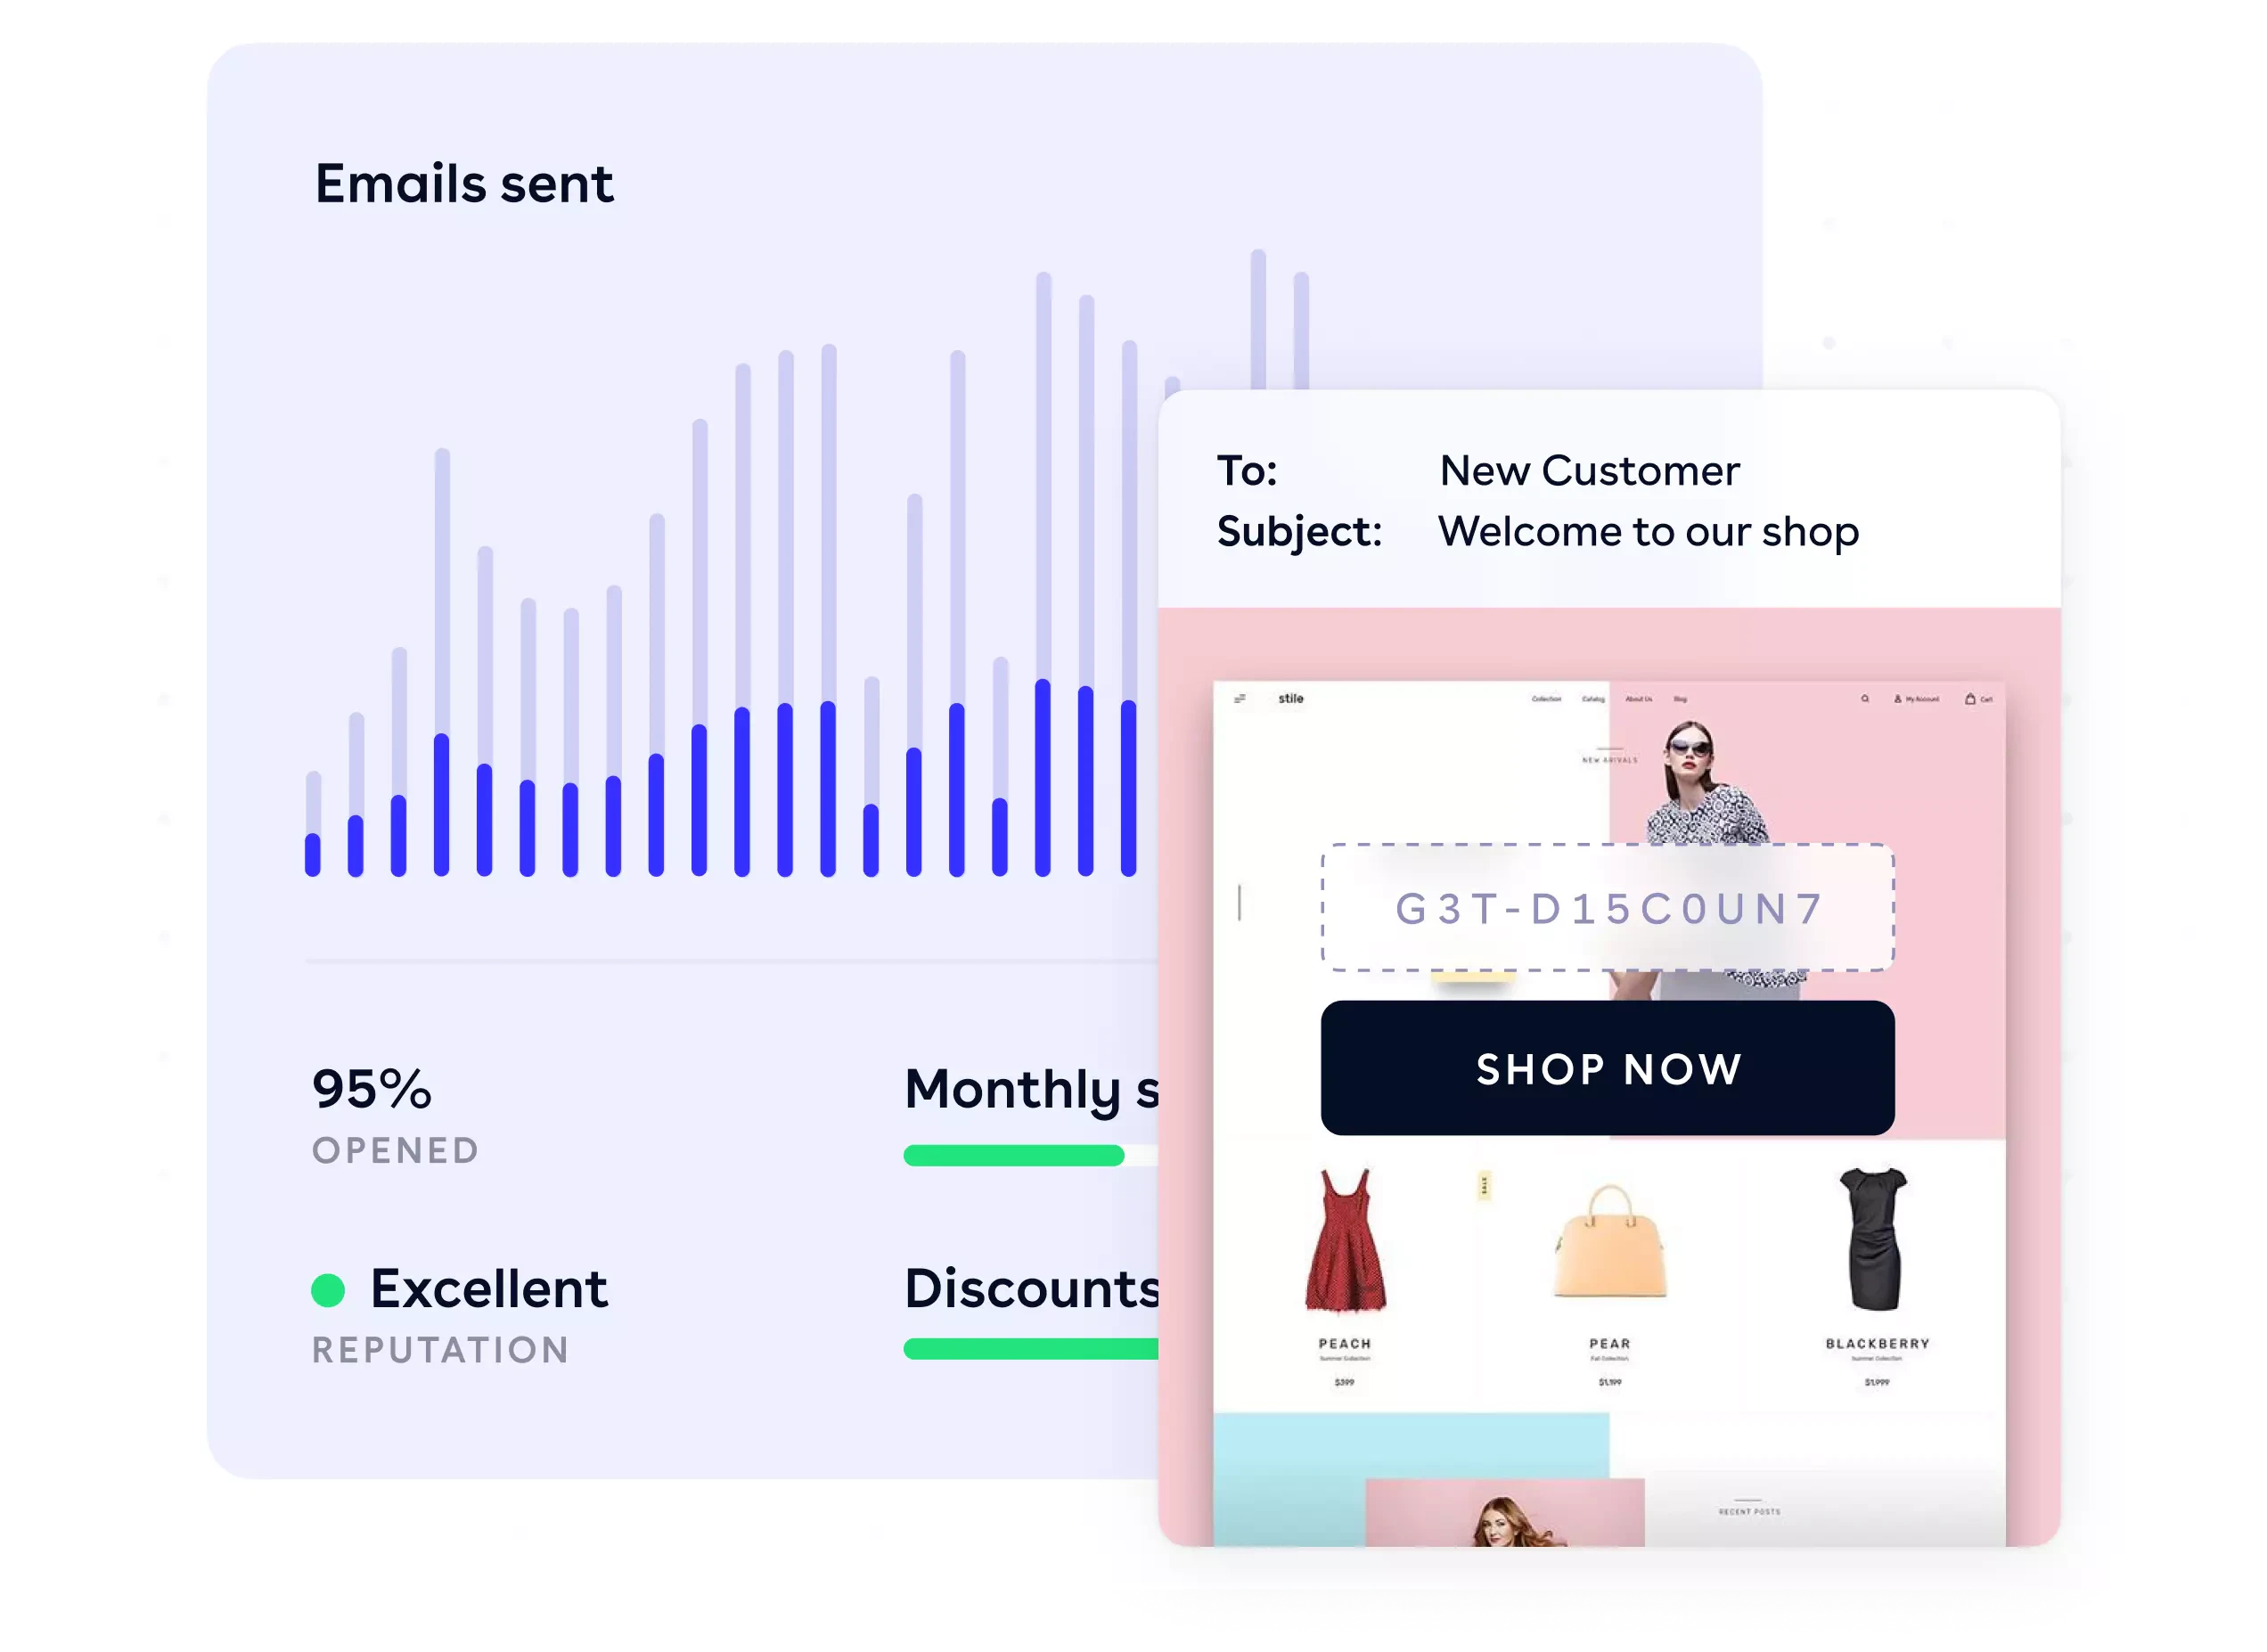 email marketing data insights